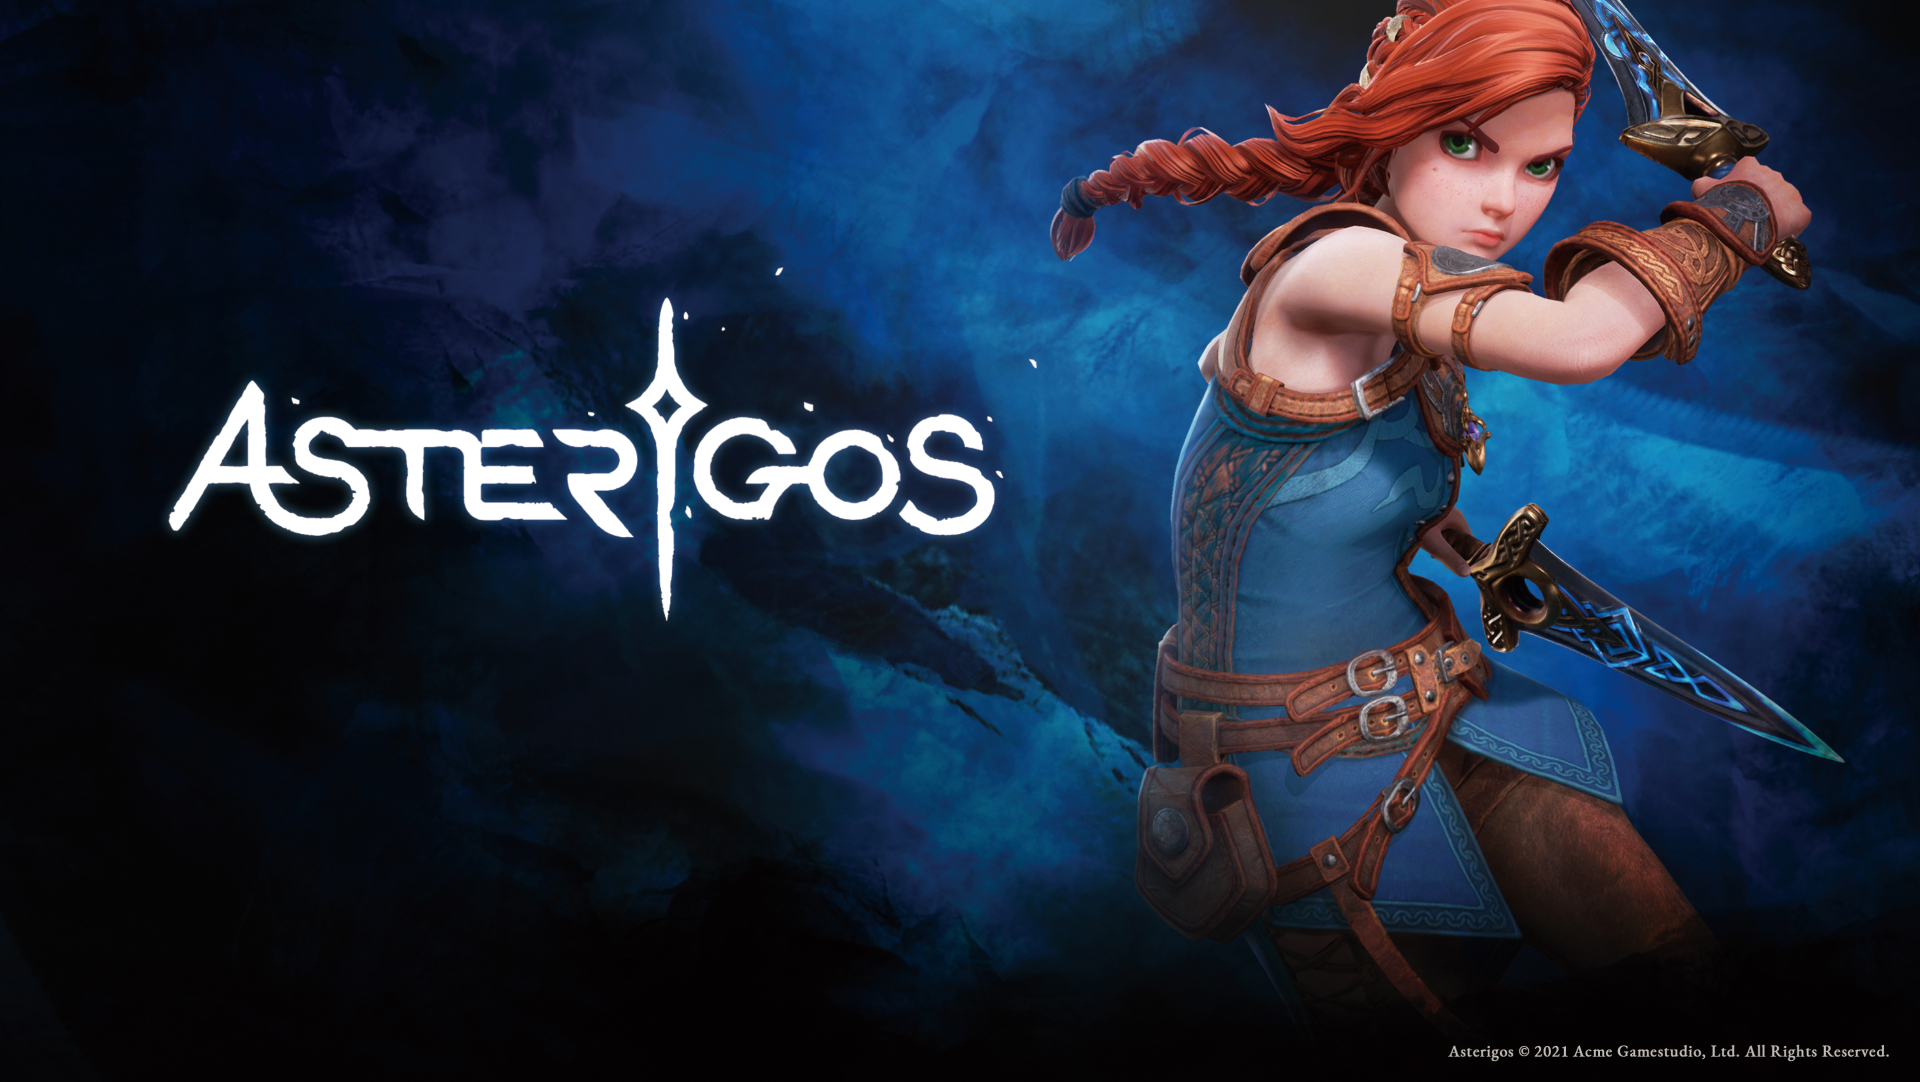 Asterigos: Curse of the Stars for mac download